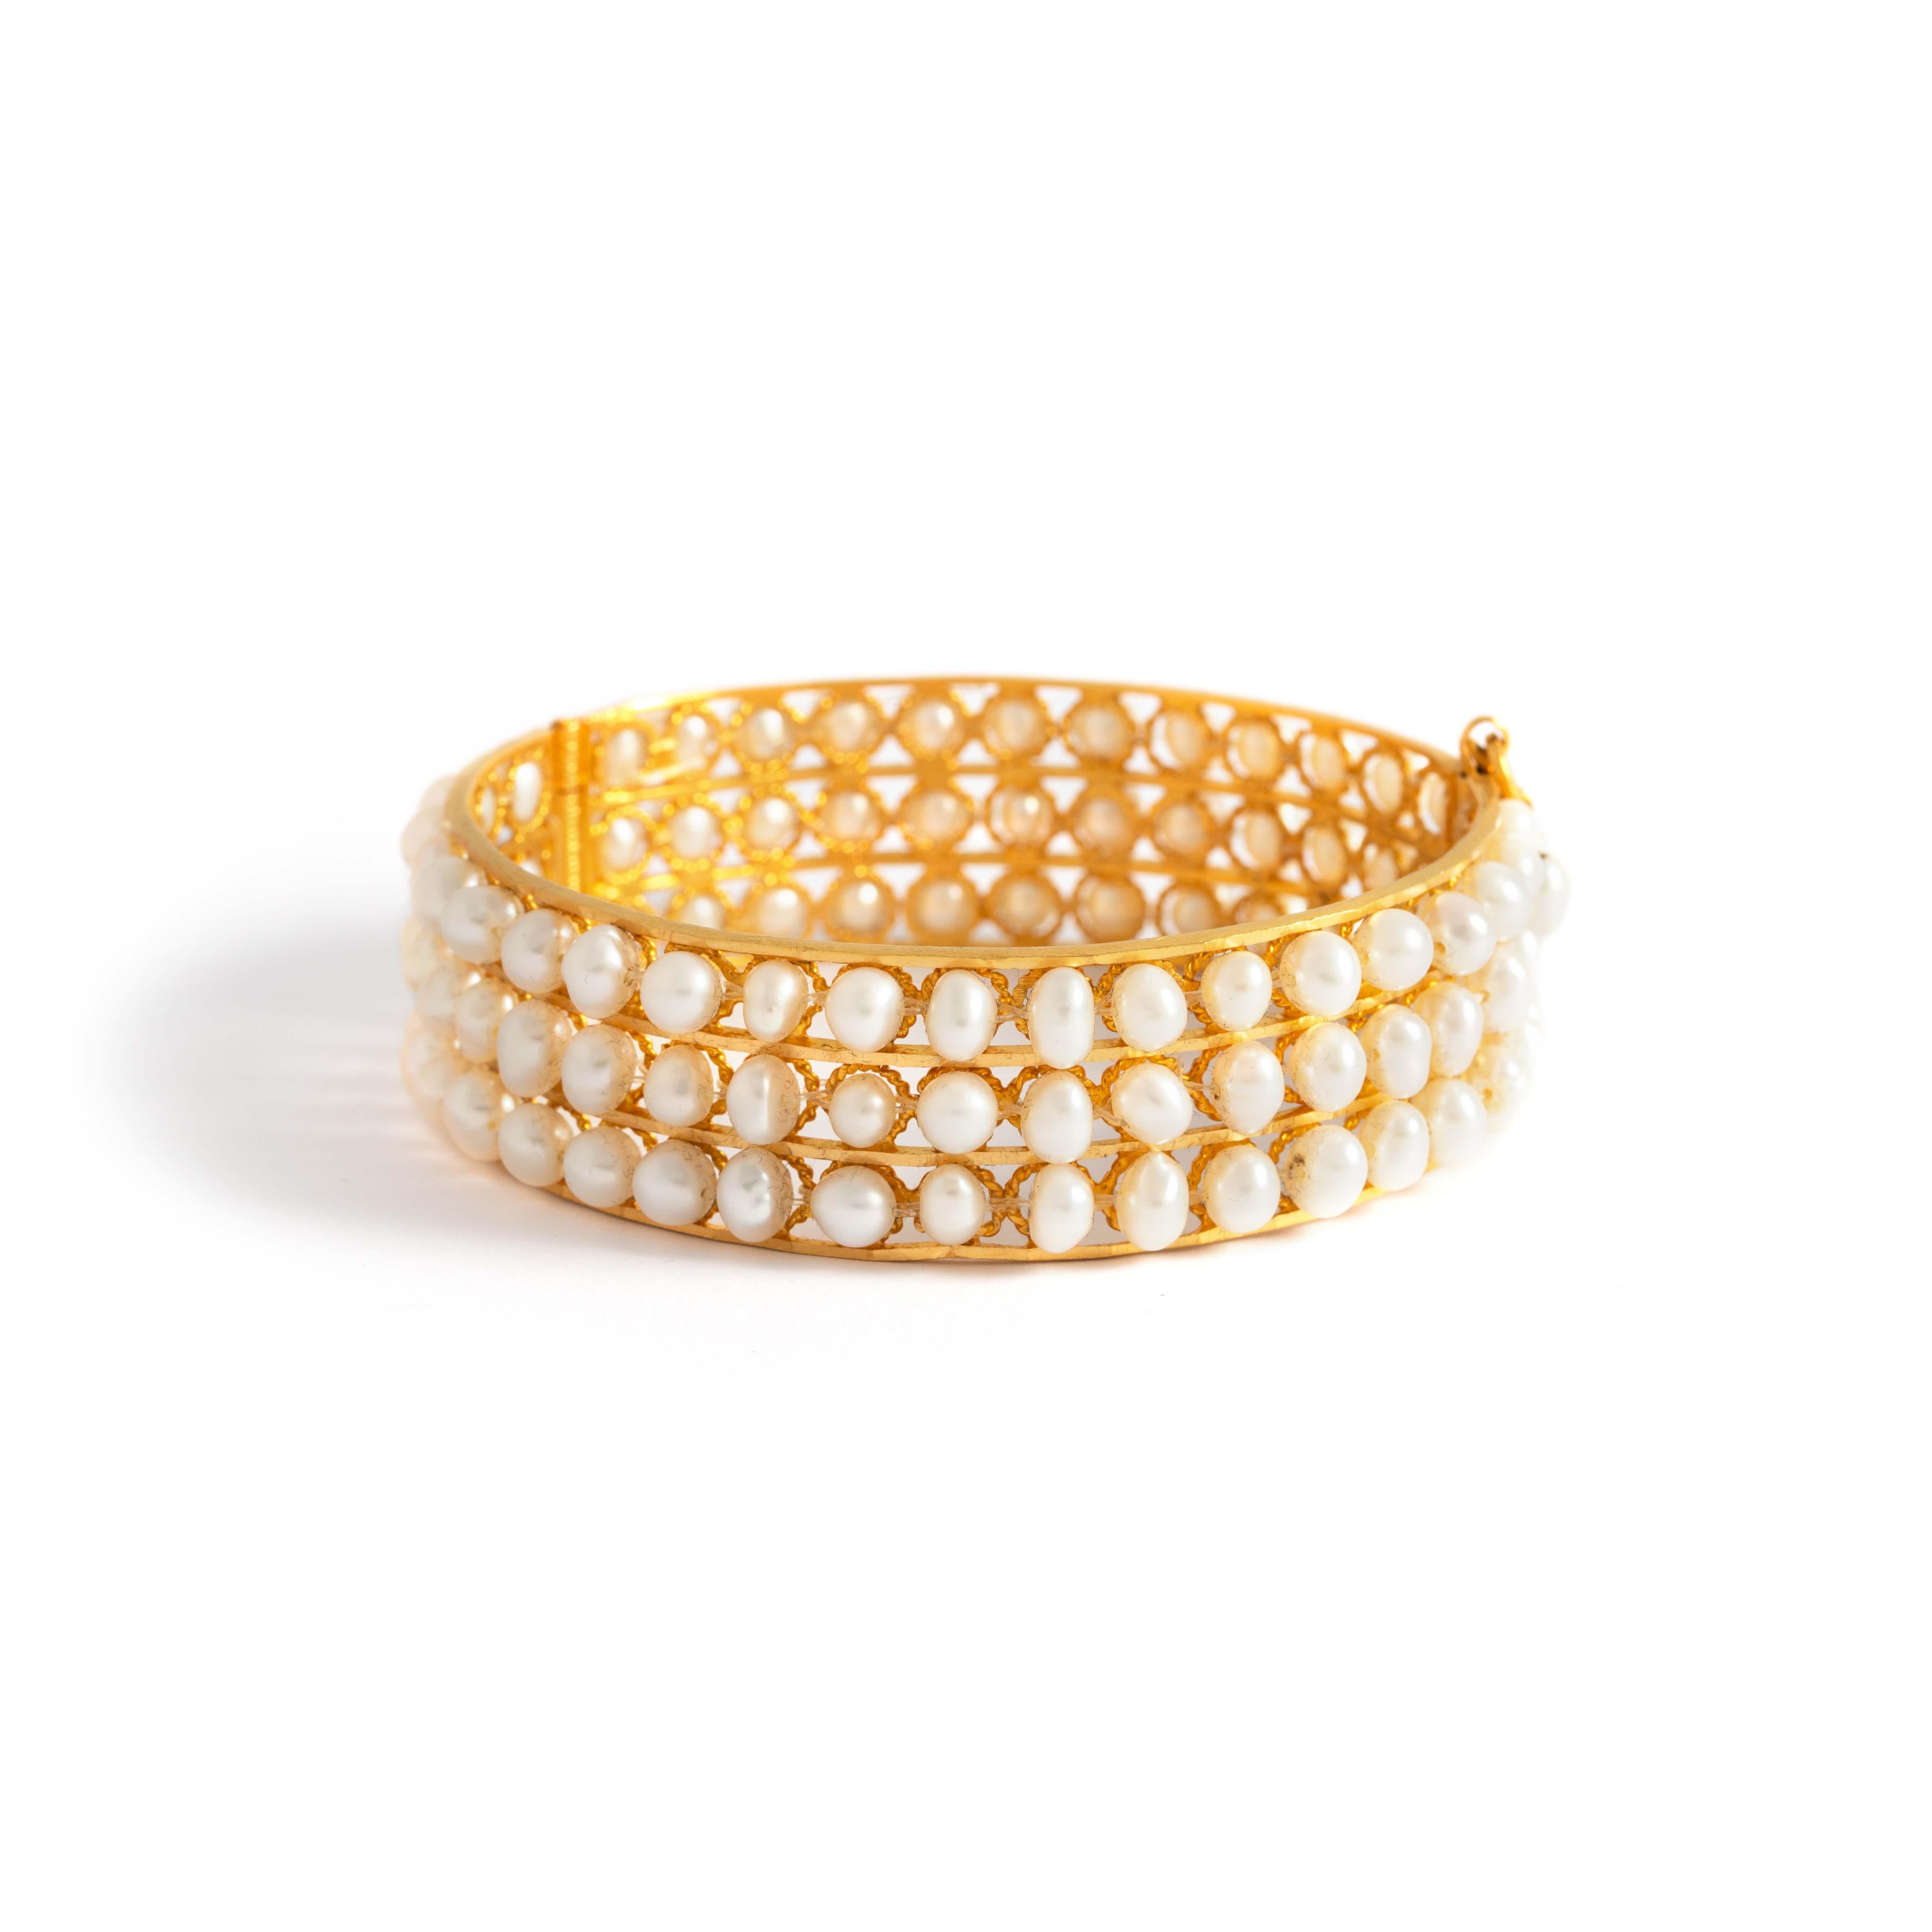 18K yellow gold bracelet studded with cultured pearls.
Gross weight: 40.01 grams.